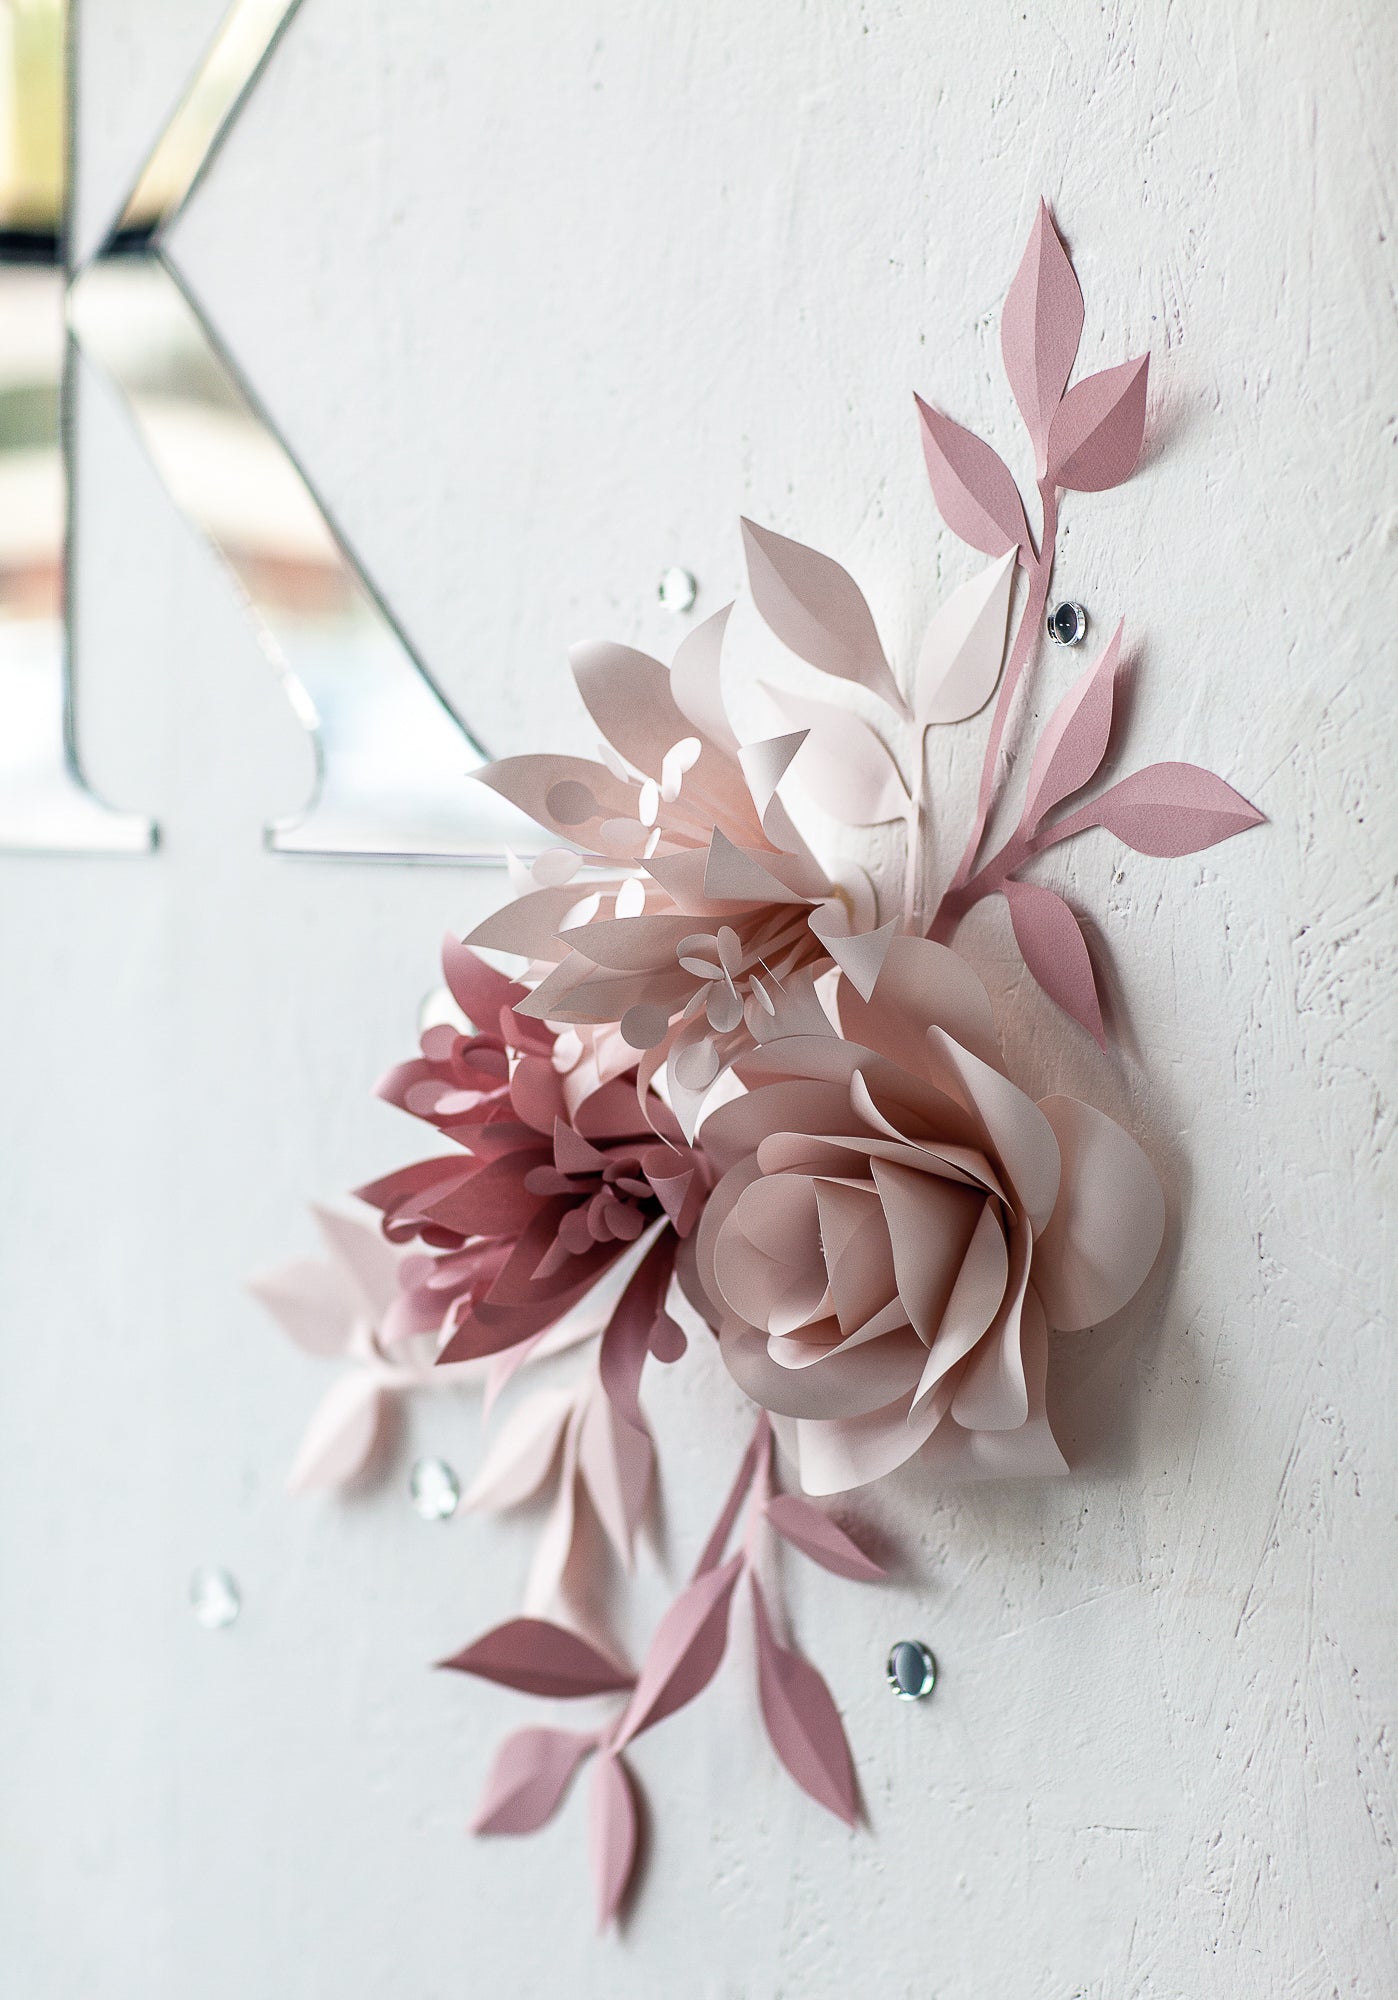 Balanced Blooms: Set of 6 Paper Flowers Surrounding the Initial Sign in Perfect Symmetry